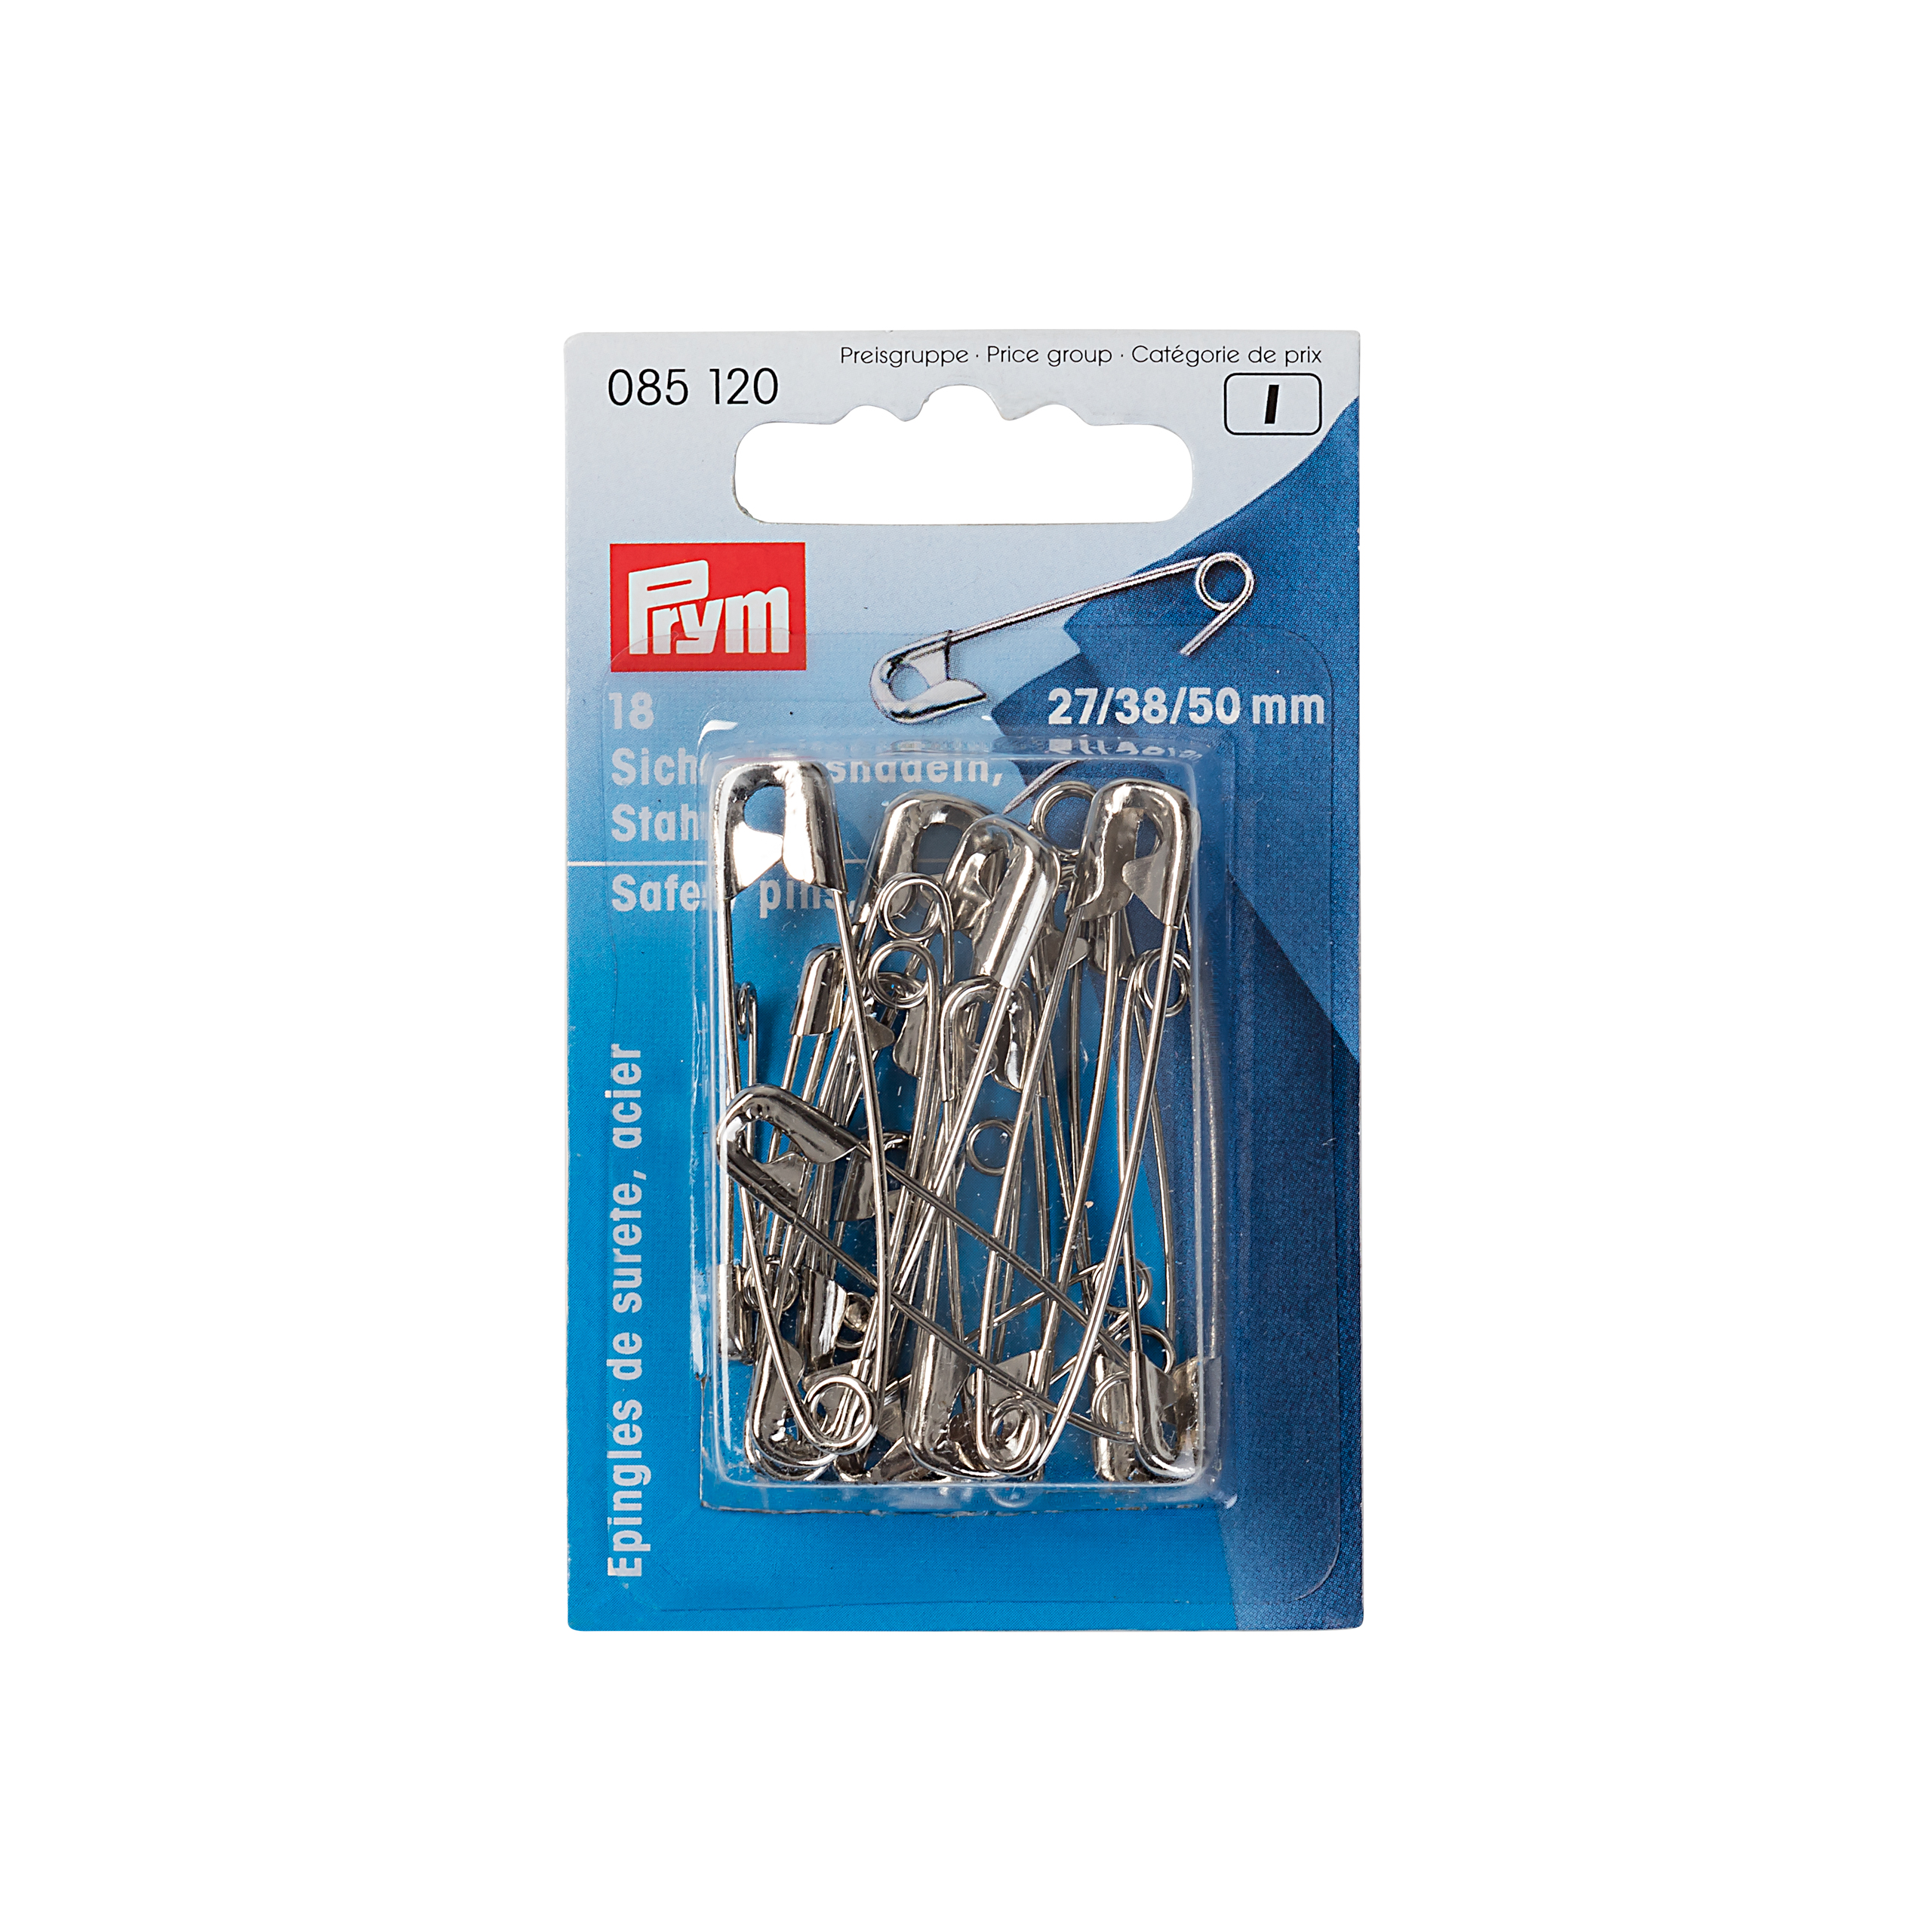 Safety Pins with coil No. 0-3 silver col 27/38/50 mm, 18 St